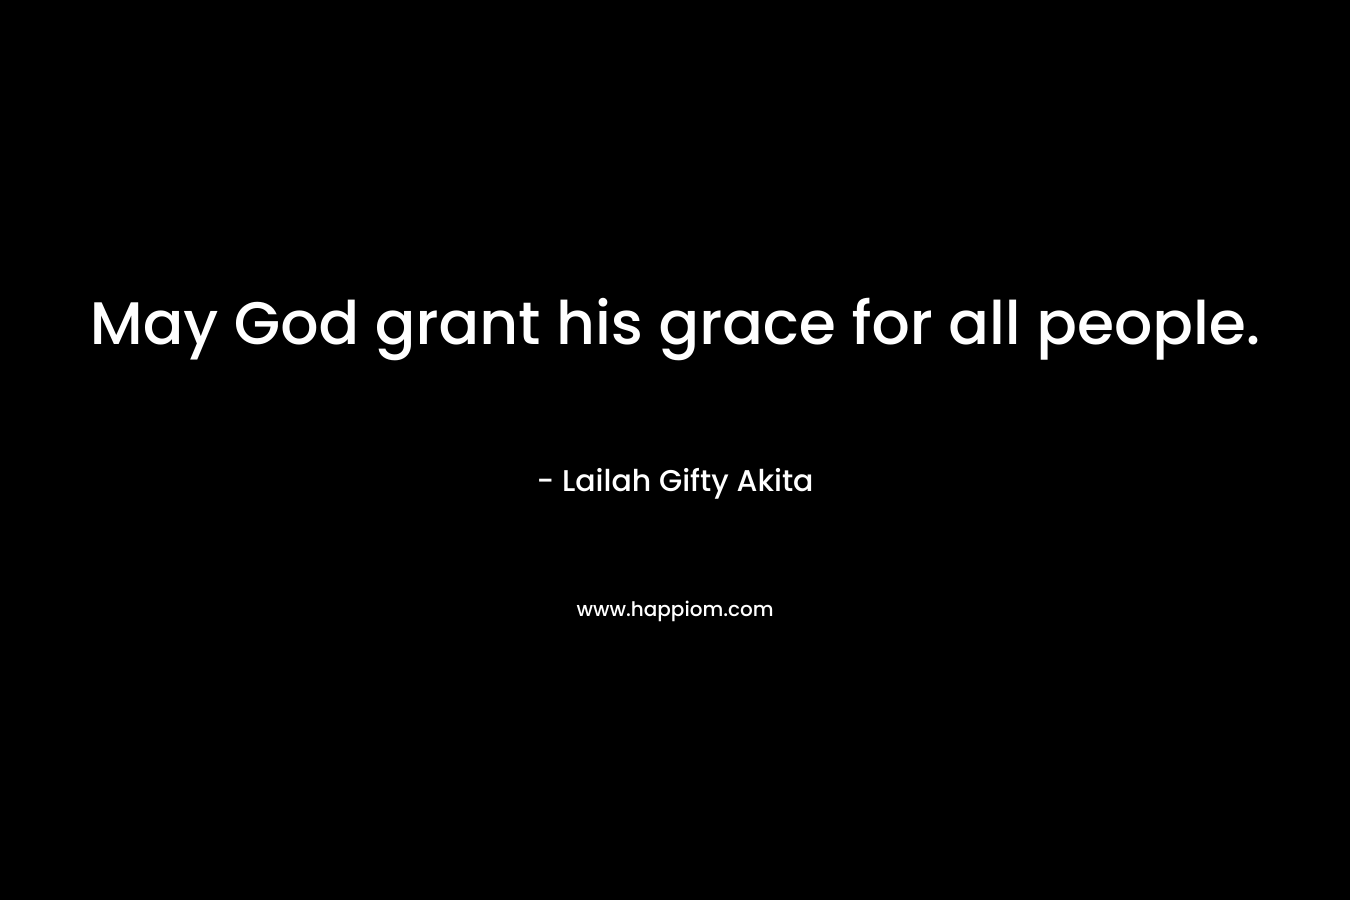 May God grant his grace for all people.